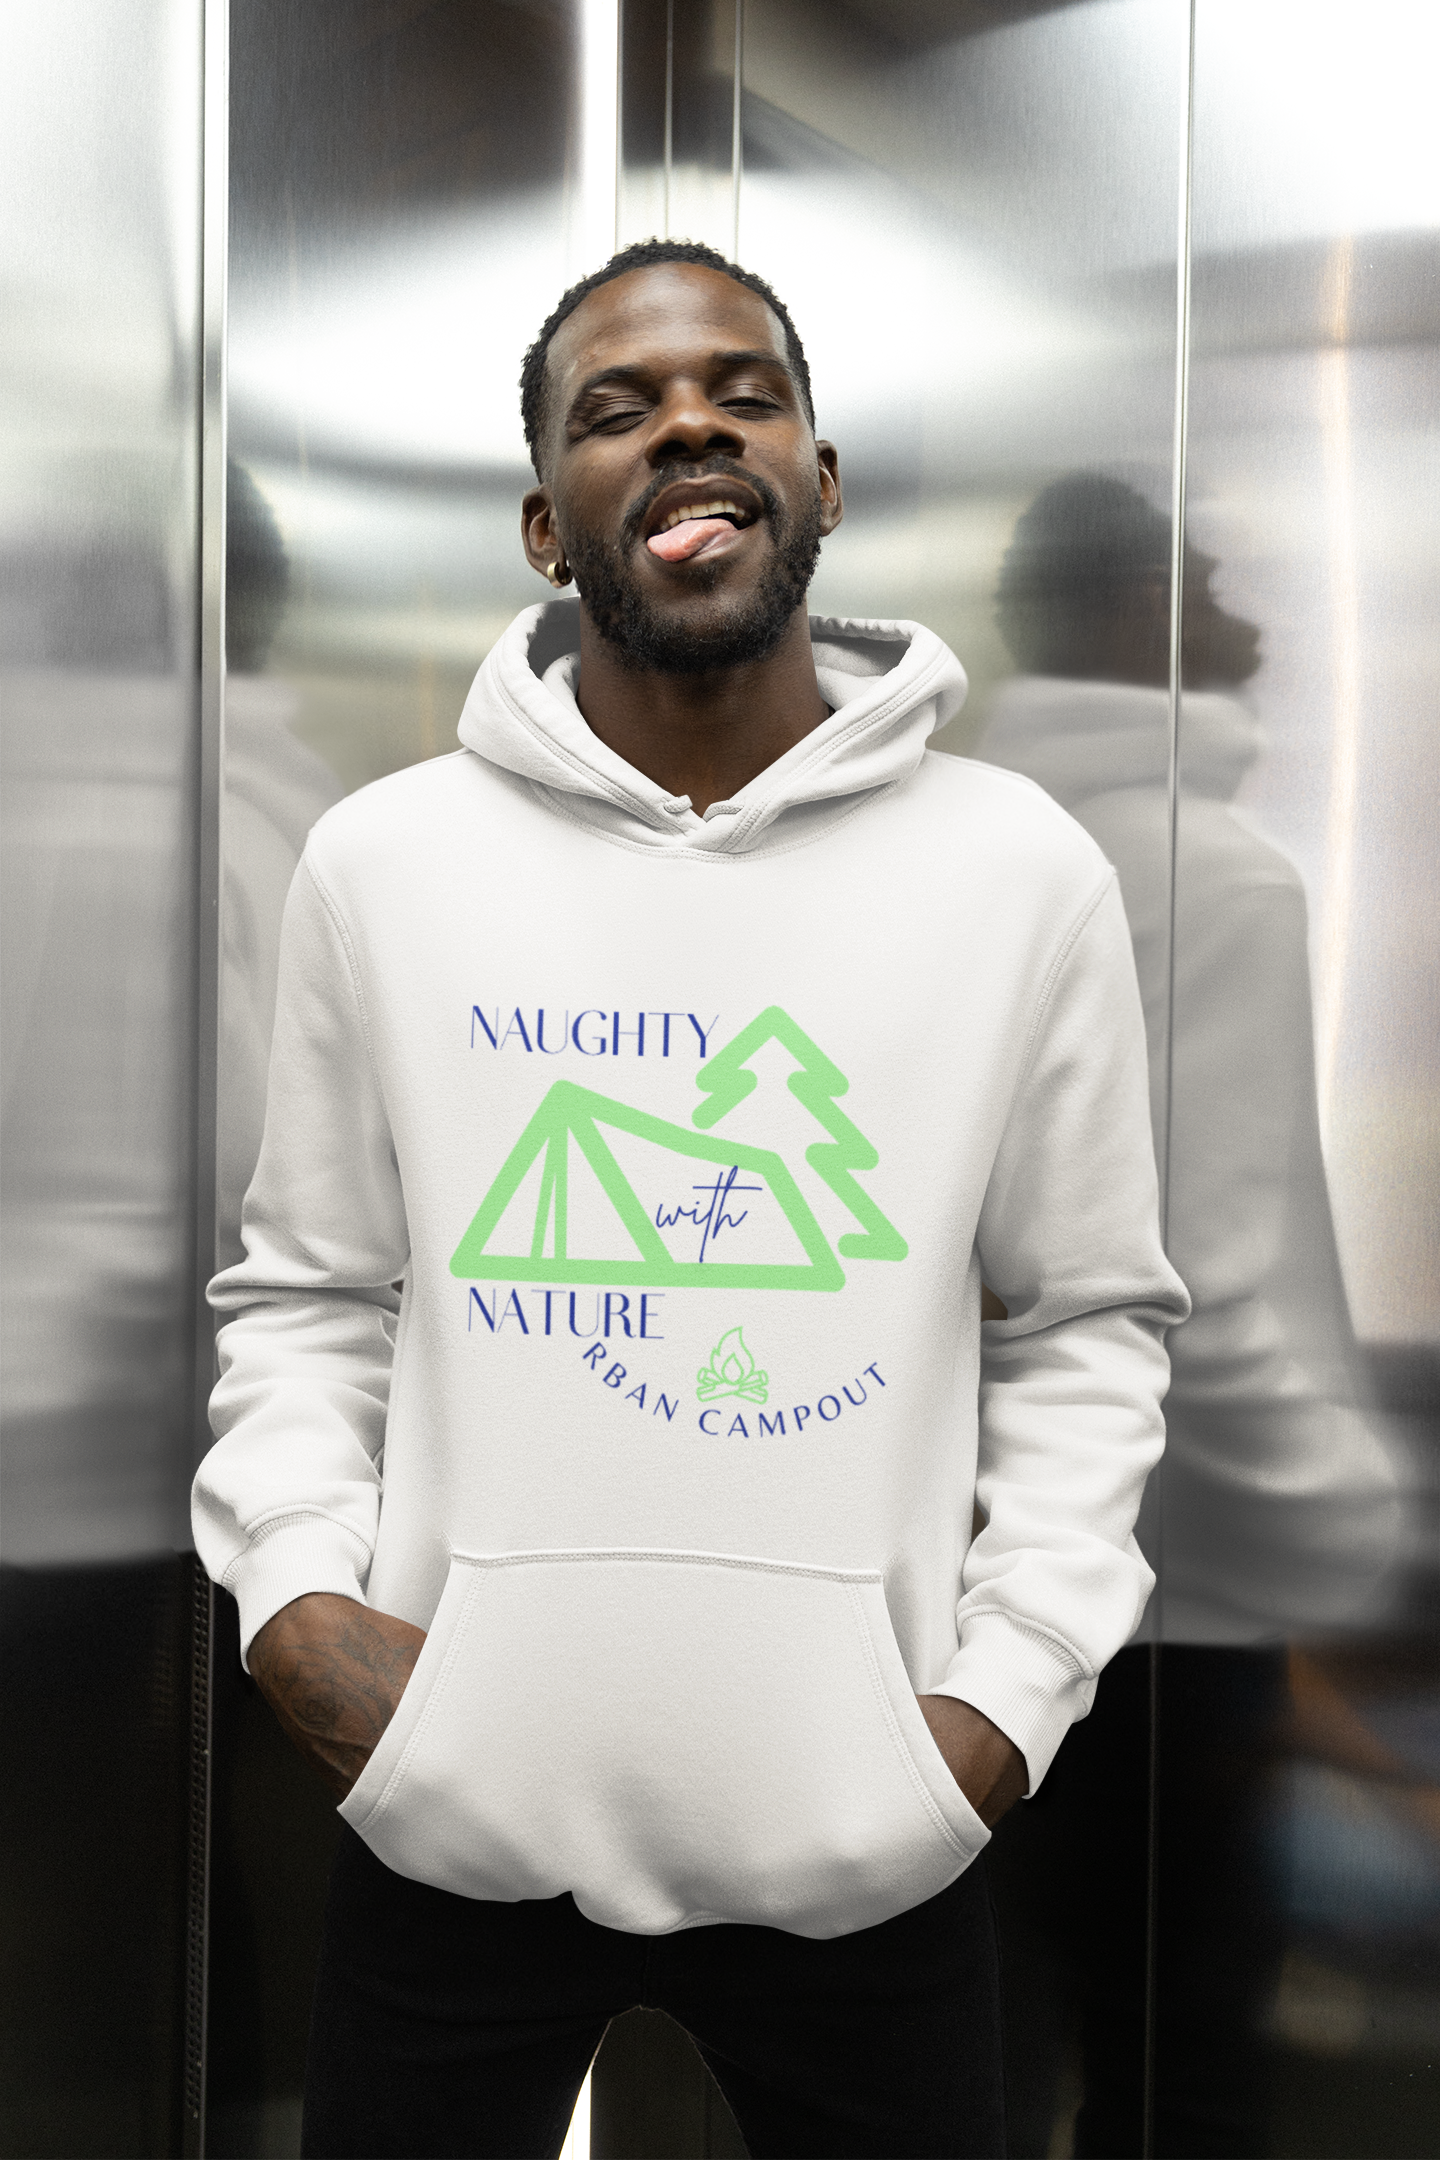 I første omgang revidere Arbejdsgiver Unisex NwN Logo Hoodie - Naughty with Nature Urban Campout